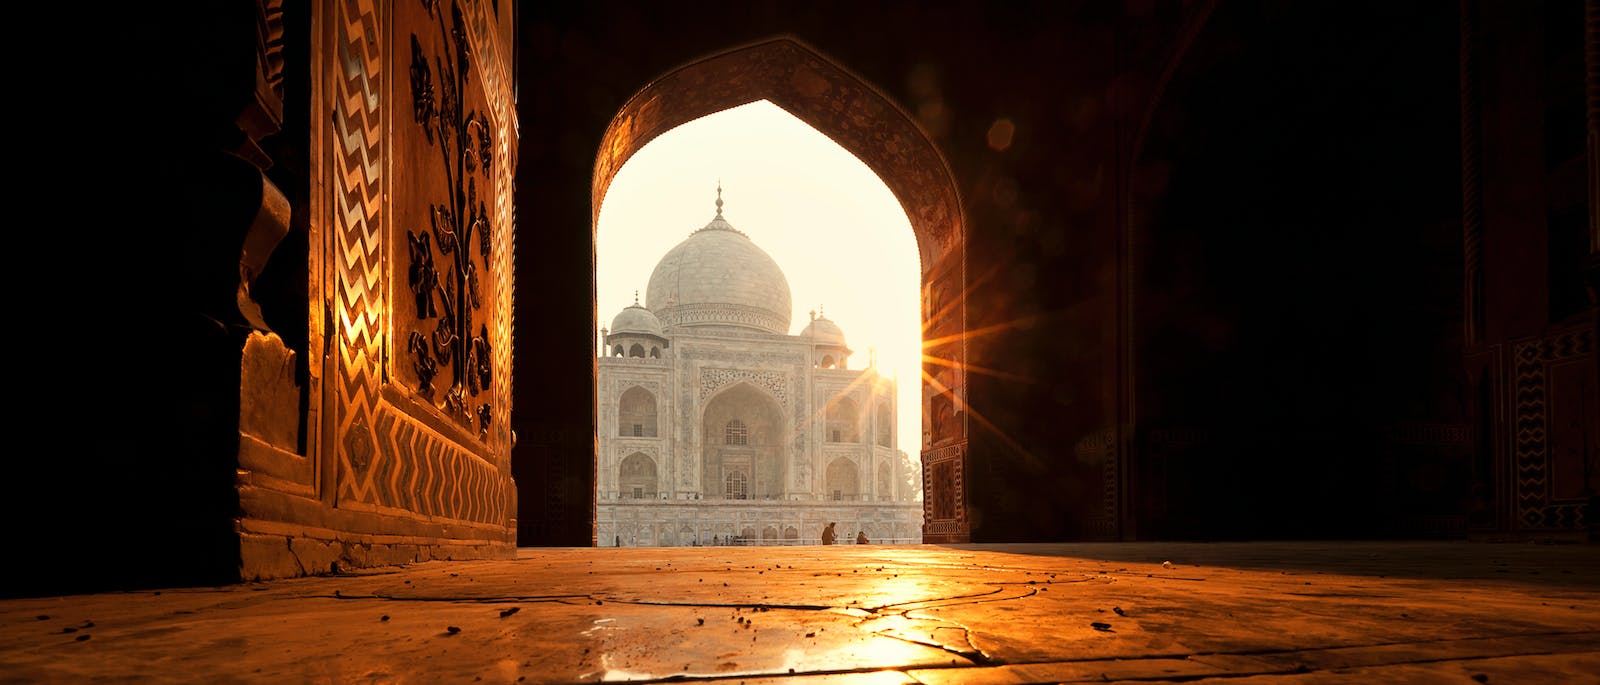 Same Day Agra Tour Fills Your Heart With Discoveries